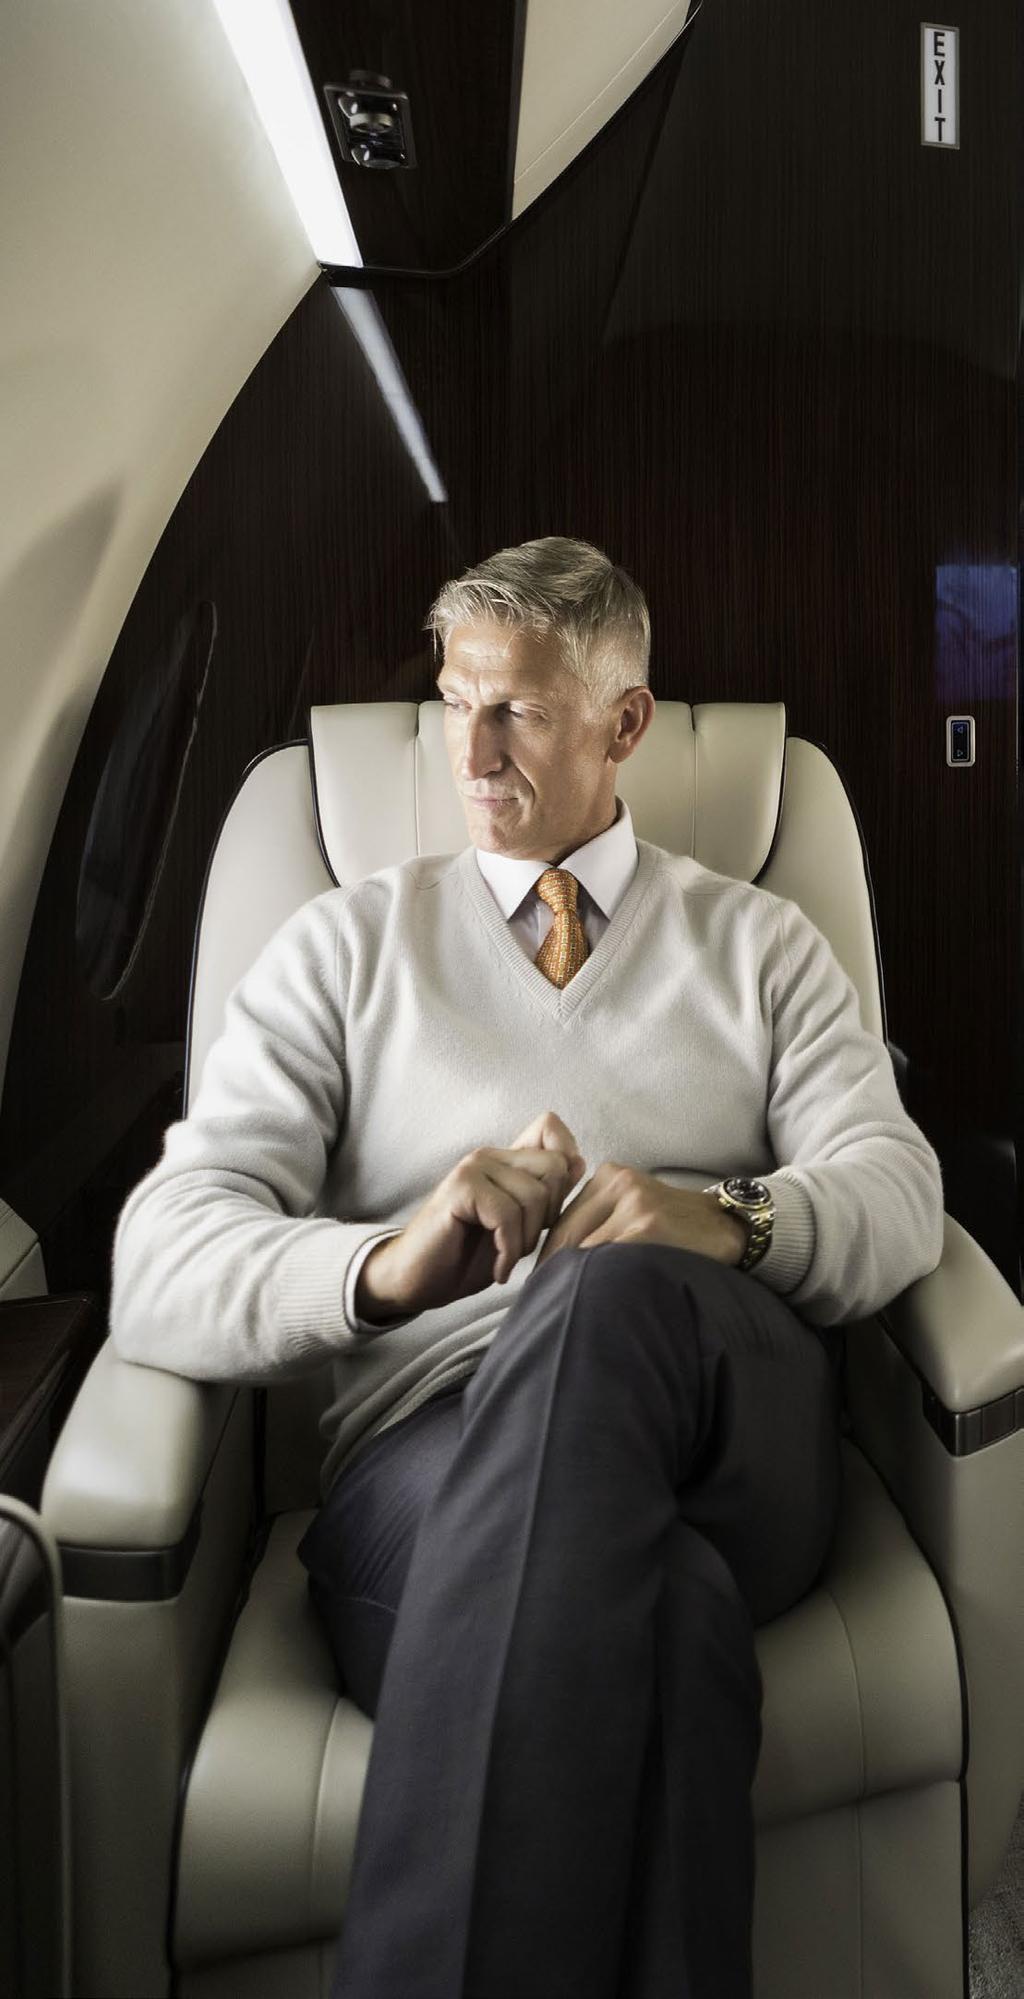 Getting Jet Specific: Why Seasoned Private Travelers Are Looking To Emulate Jet Ownership Since the turn of the 21 st century, private aviation has changed tremendously from the traveler s point of